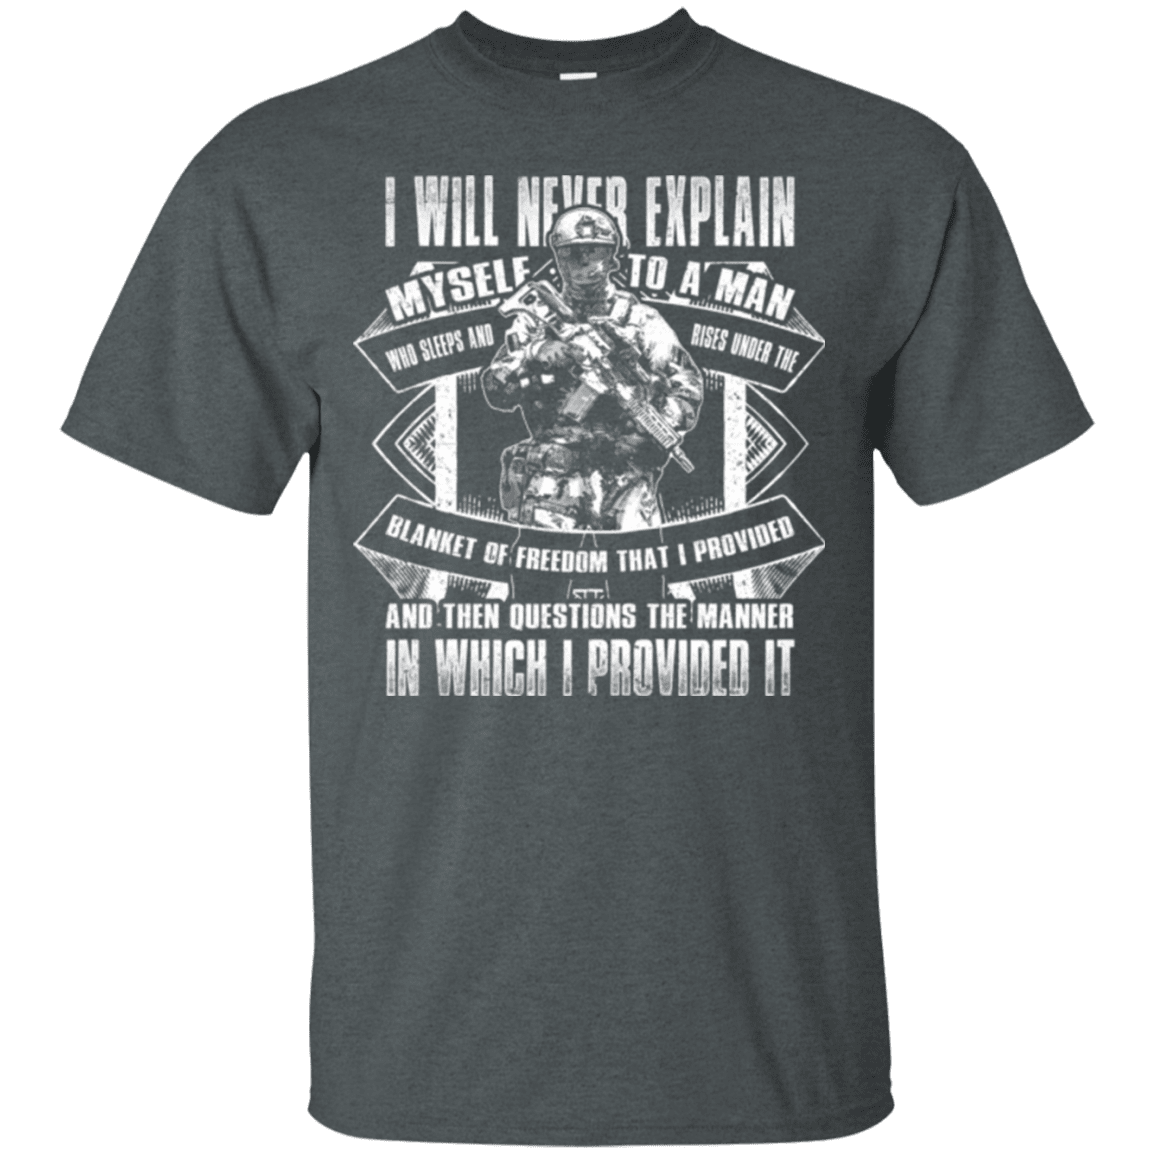 Military T-Shirt "I will never explain myself to a man" Front-TShirt-General-Veterans Nation